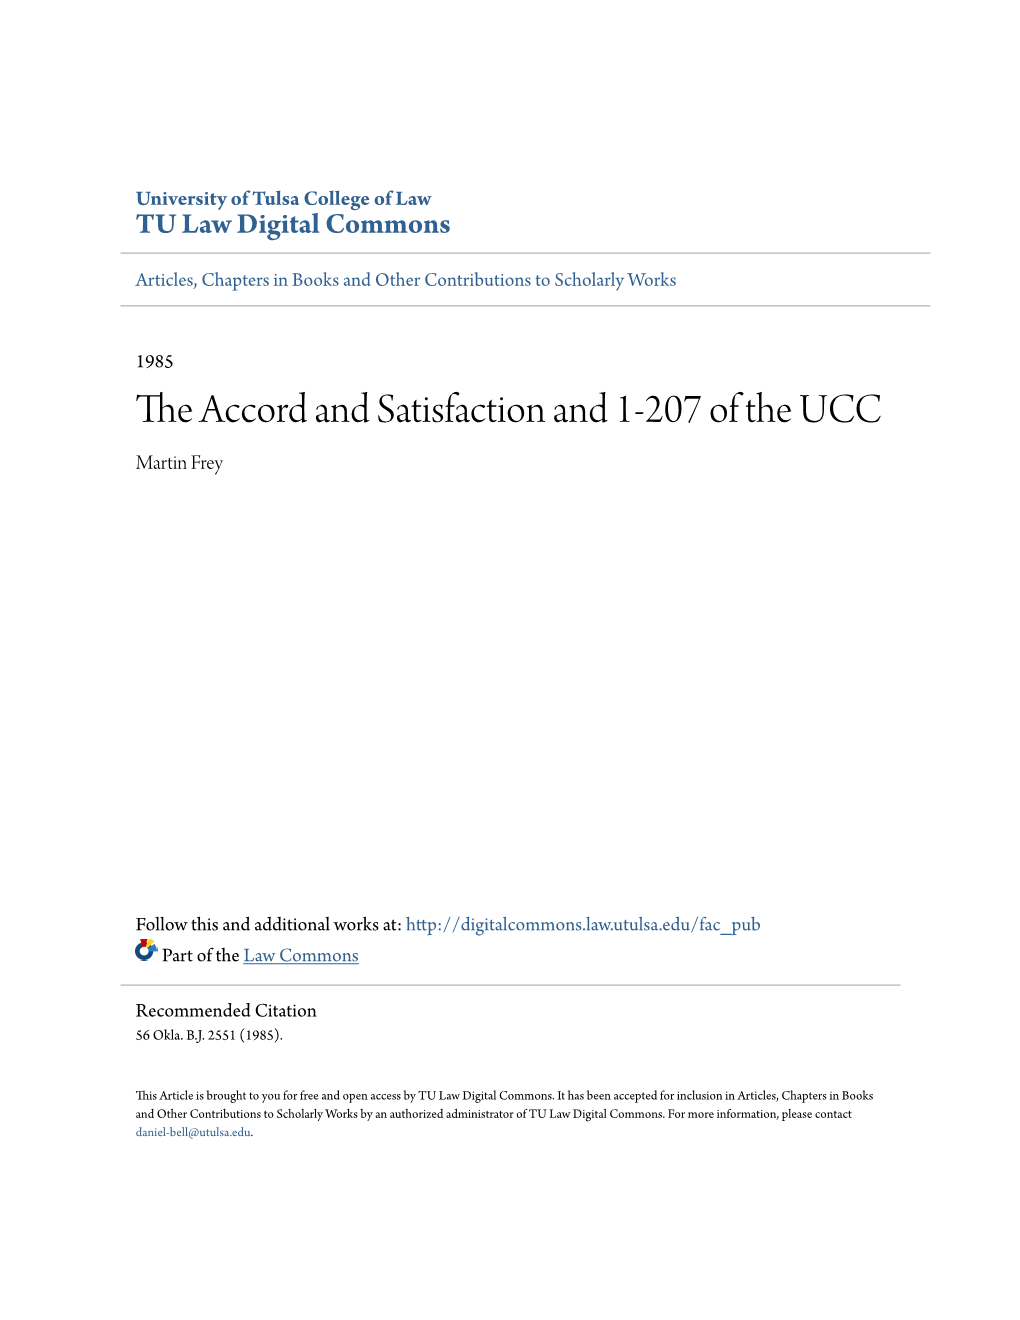 The Accord and Satisfaction and 1-207 of the UCC Martin Frey